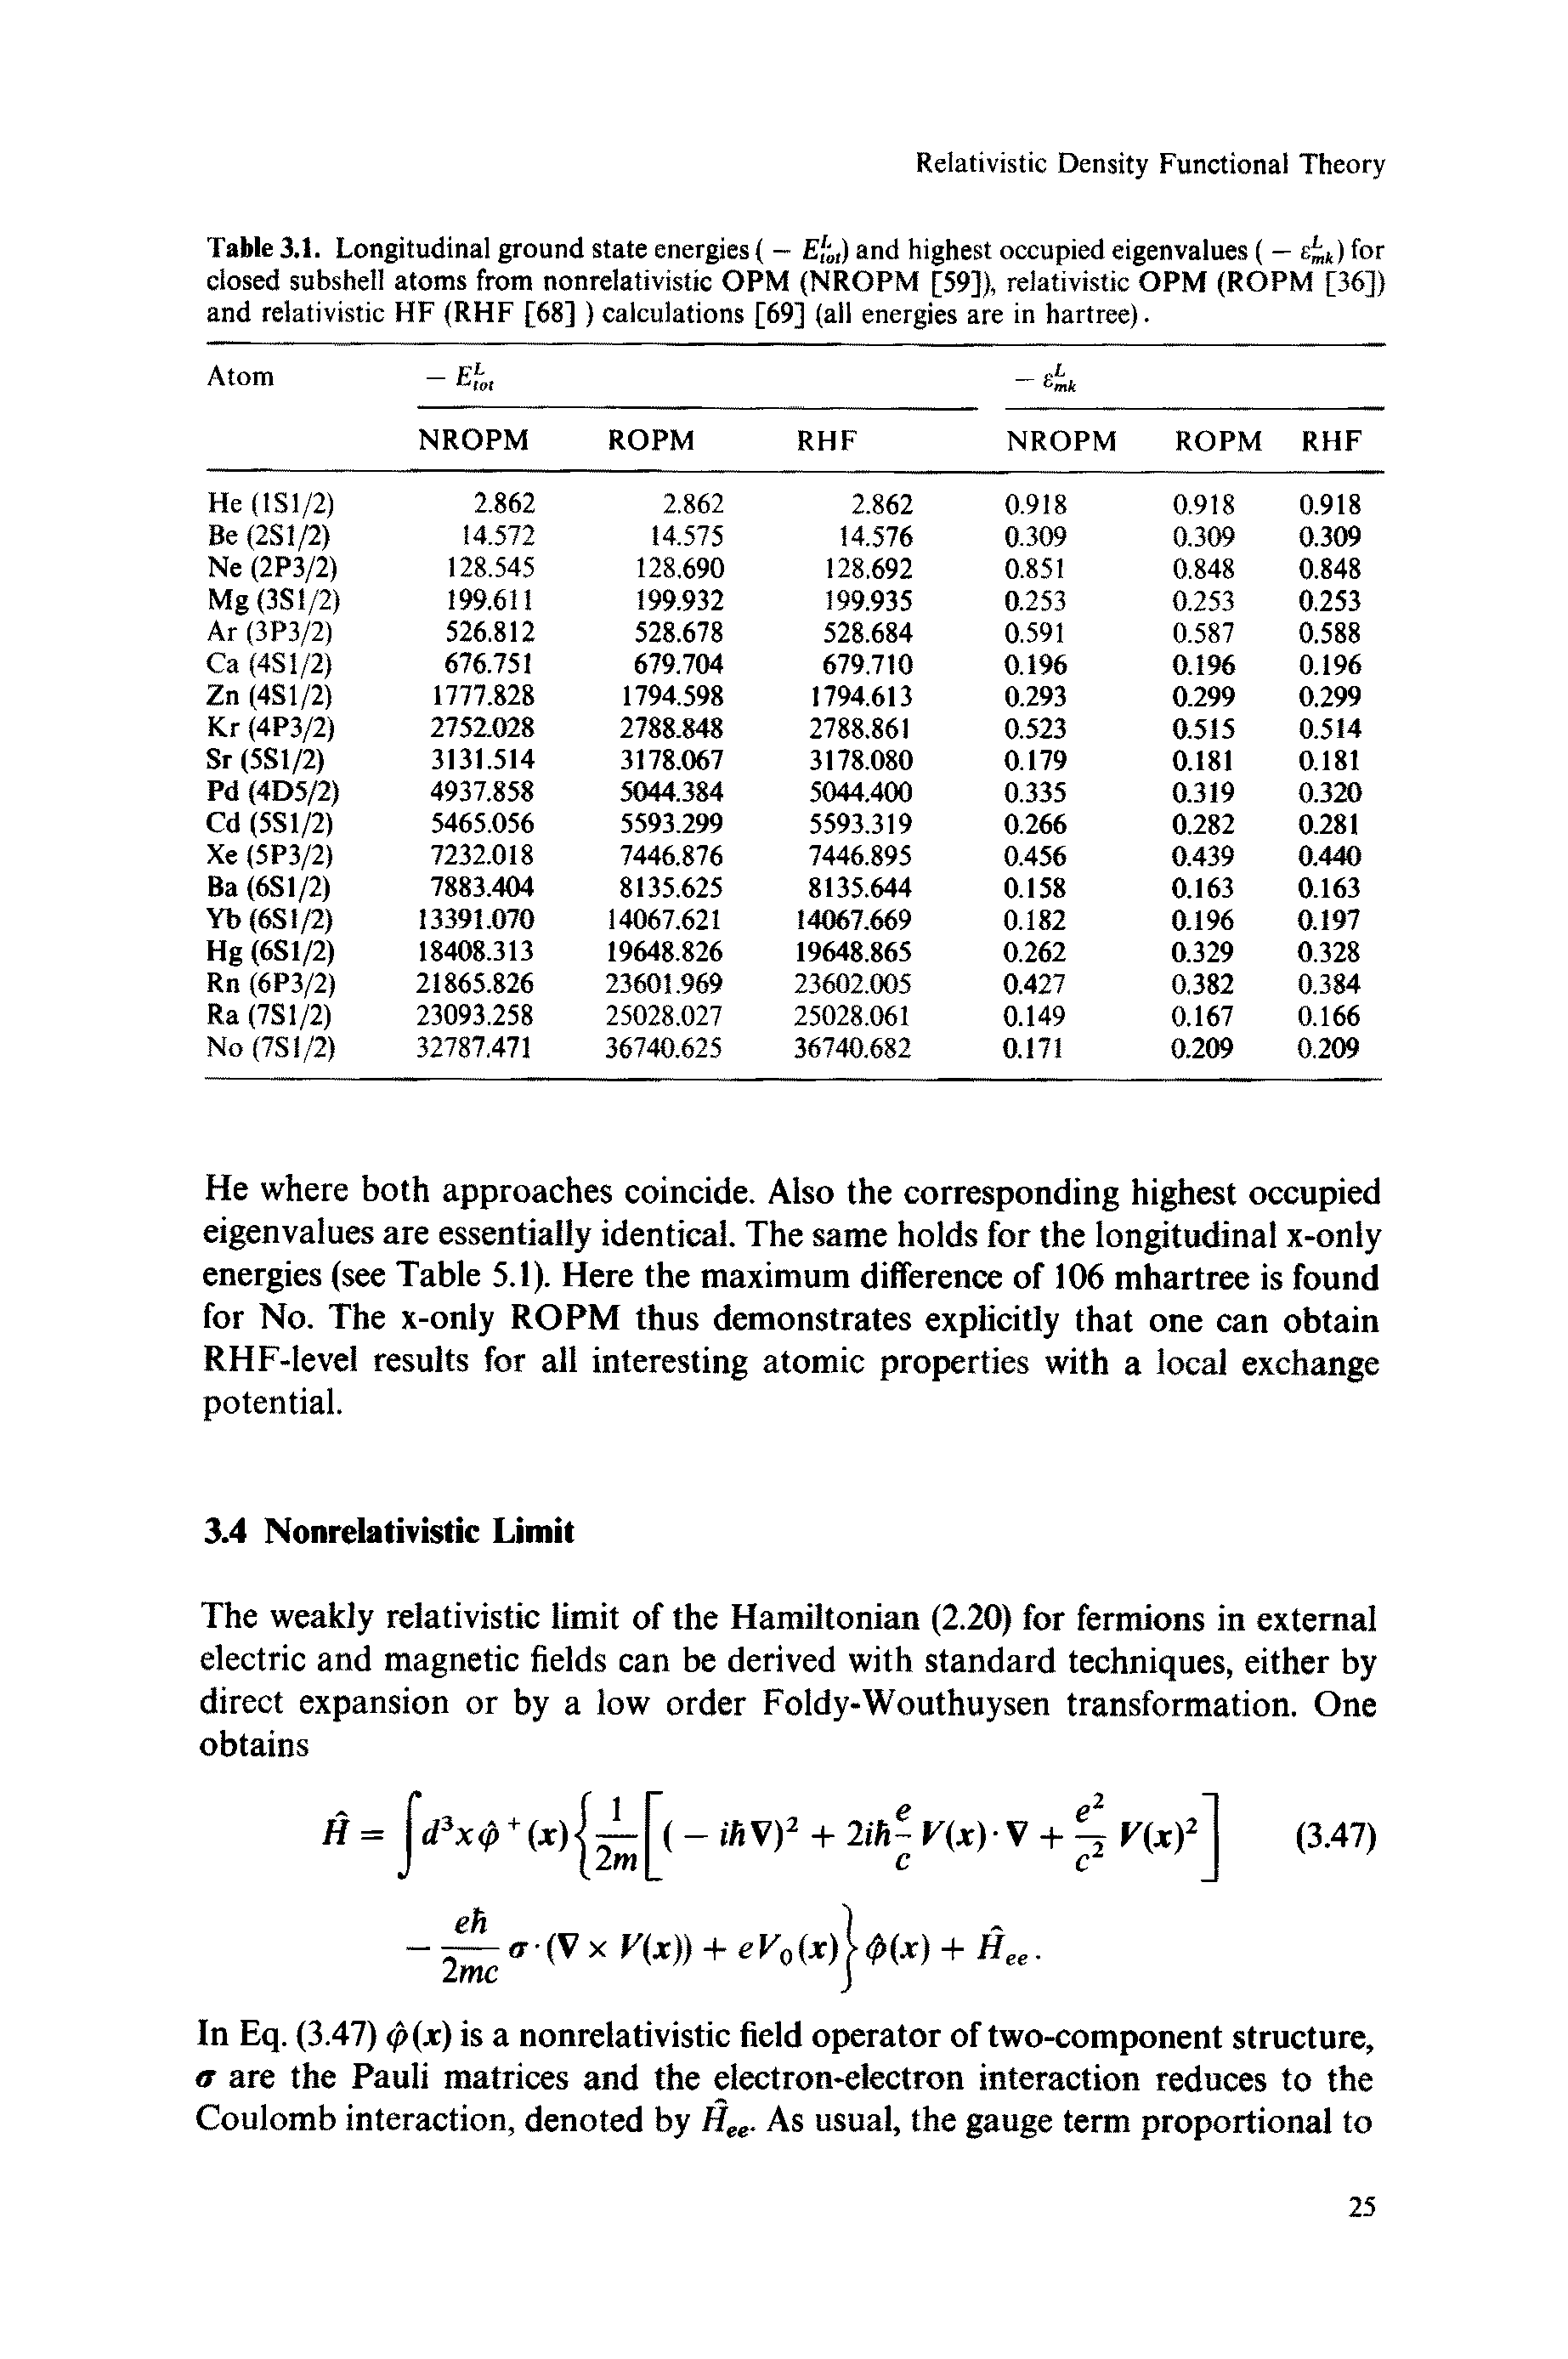 Table 3.1. Longitudinal ground state energies ( - / ,) and highest occupied eigenvalues ( — iu) for closed subshell atoms from nonrelativistic OPM (NROPM [59]), relativistic OPM (ROPM [36]) and relativistic HF (RHF [58] ) calculations [69] (all energies are in hartree).